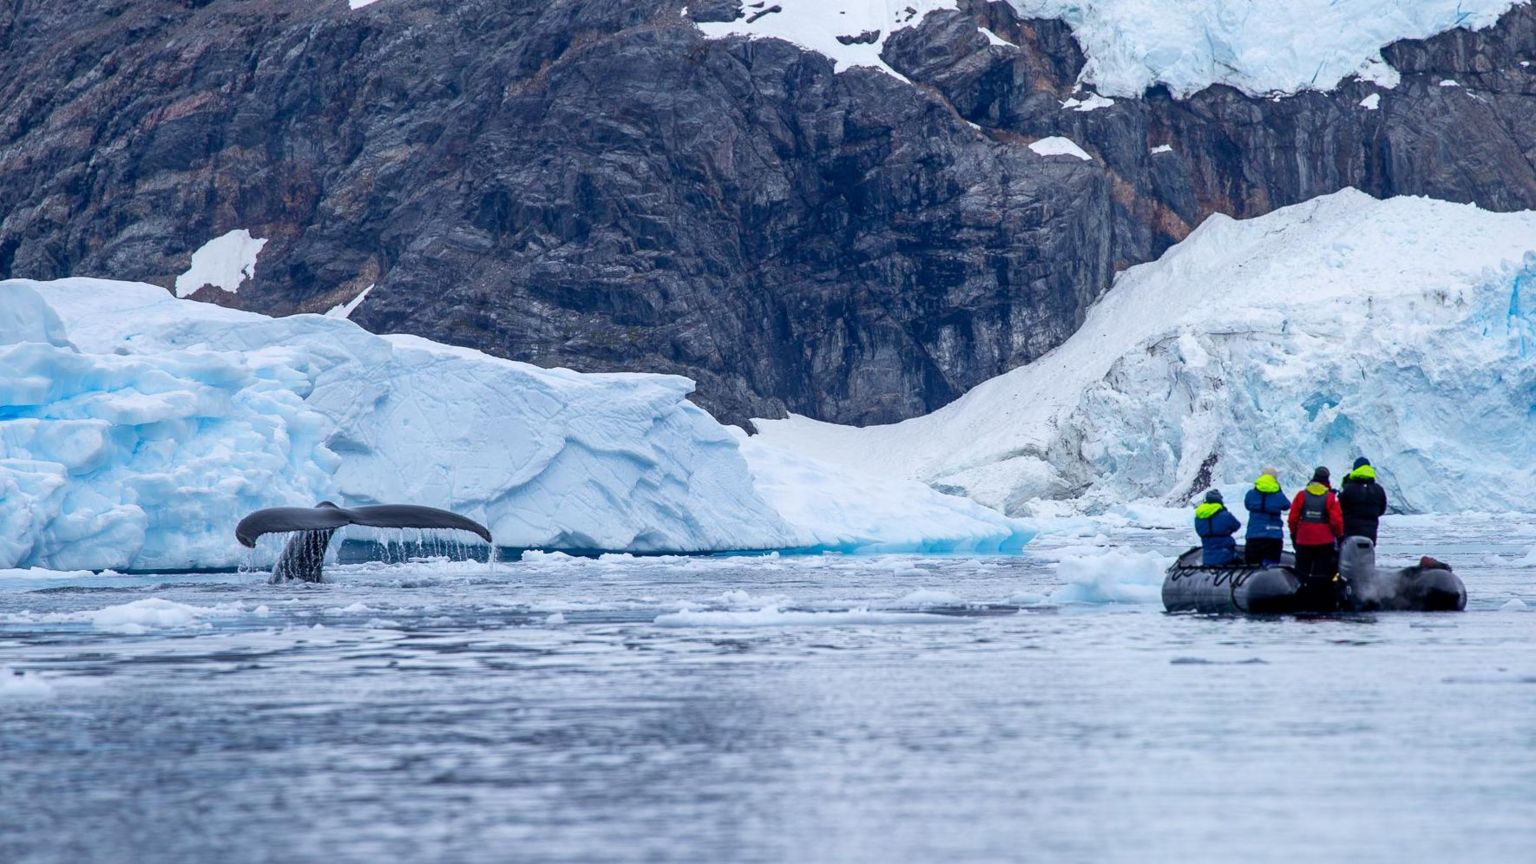 Scientists in a small boat approach a humpback whale in Antarctica